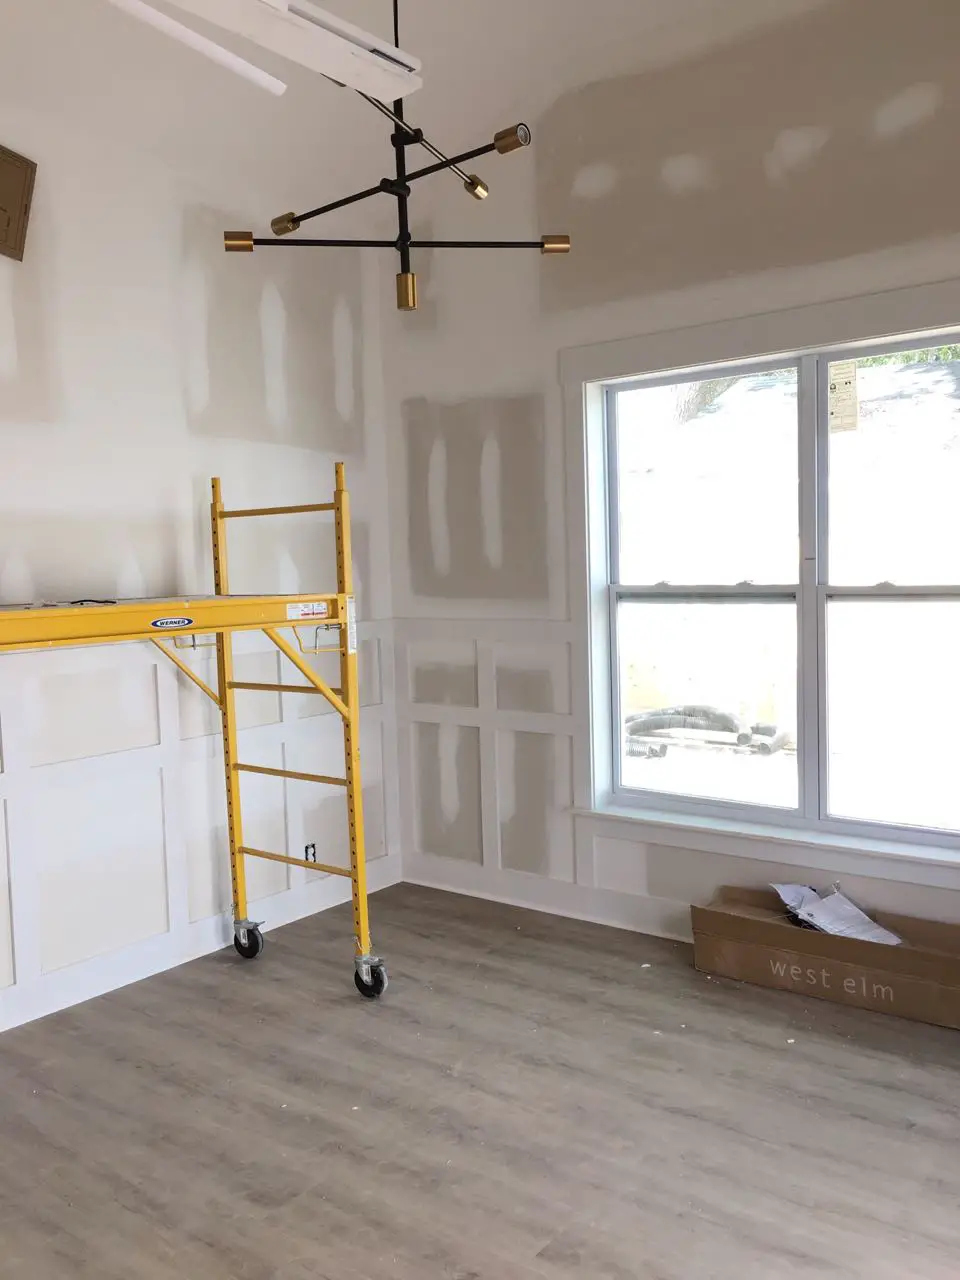 Guest house in progress with paneling and modern chandelier - That Homebird Life Blog